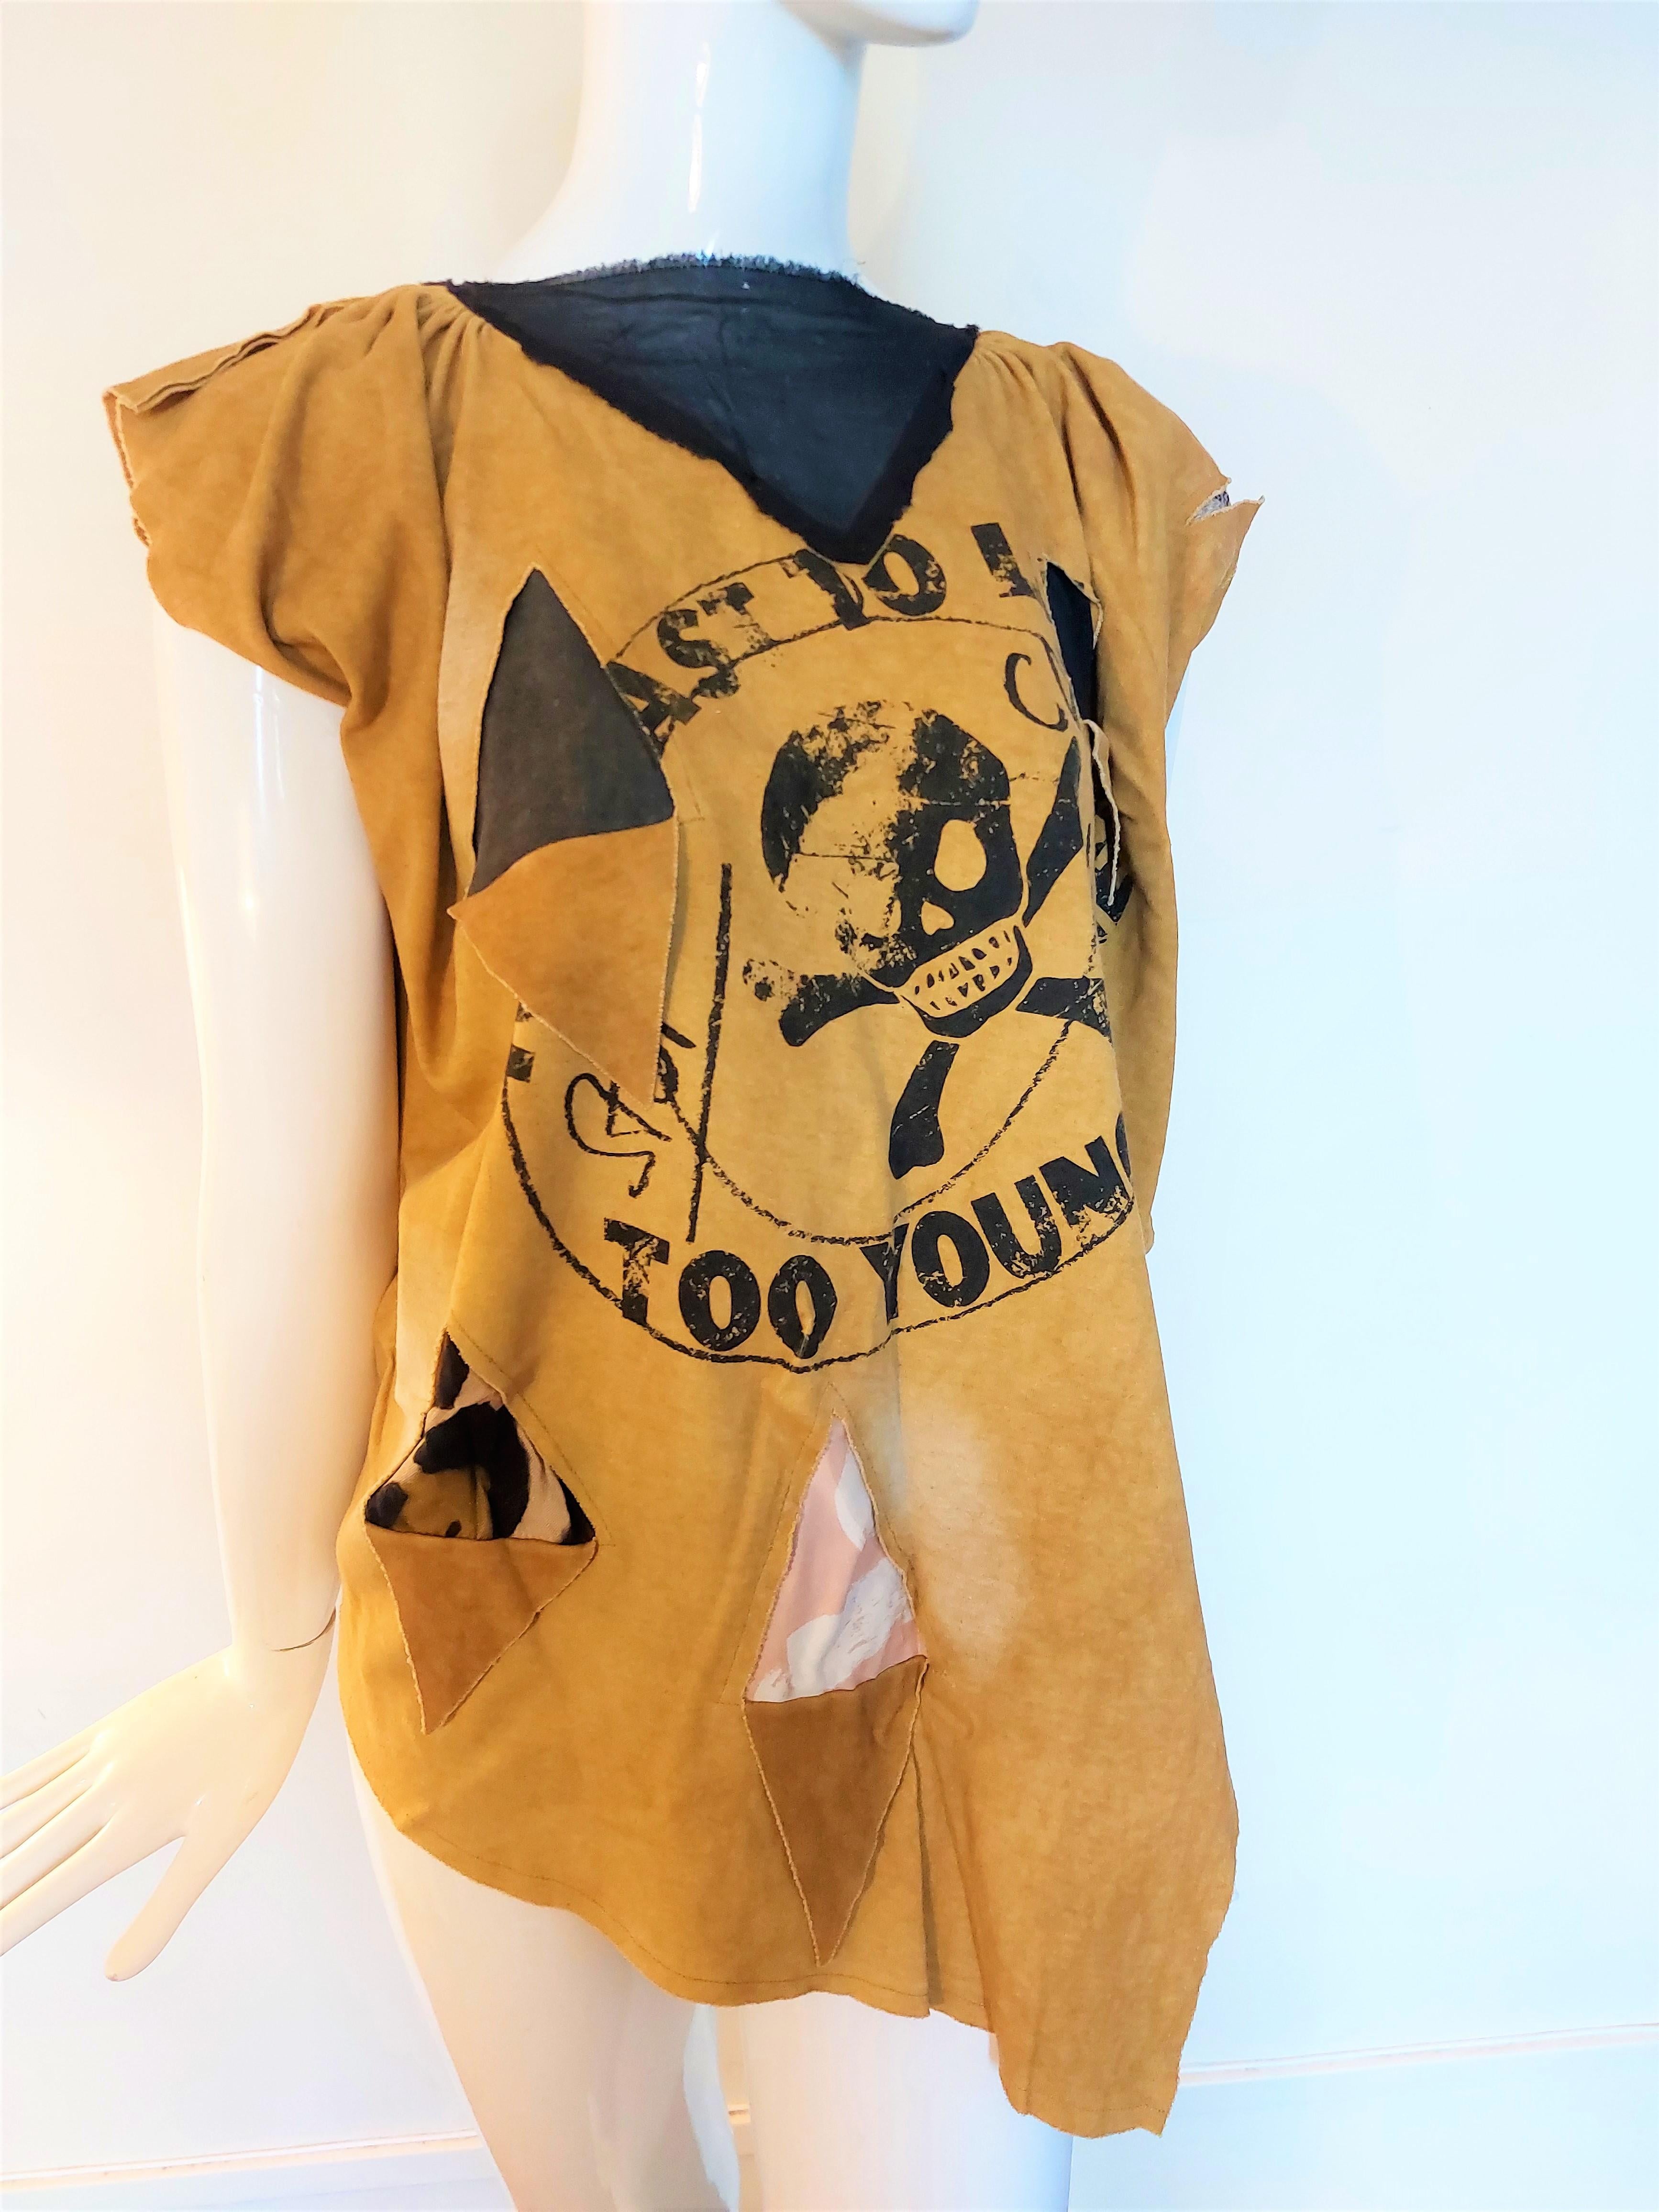 Vivienne Westwood Skull ’Too fast To Live Too Young to Die’ Punk Rock Dress Top 2